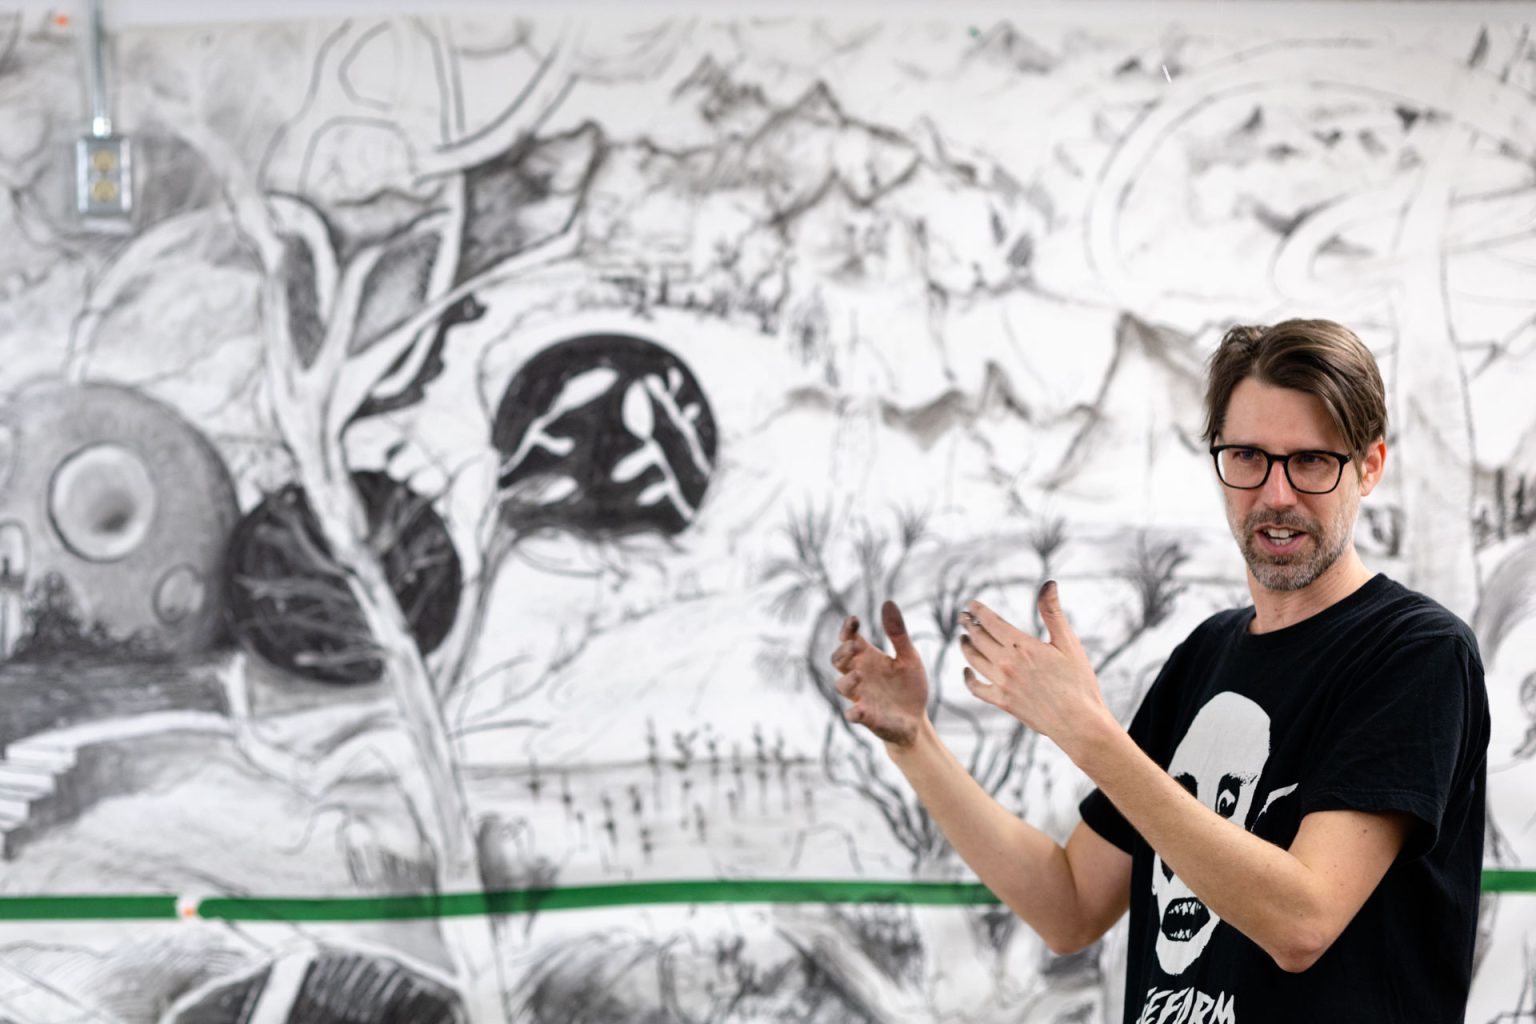 A man with dark hair and glasses stands in front of a black and white mural. He is wearing a black shirt with white drawing.